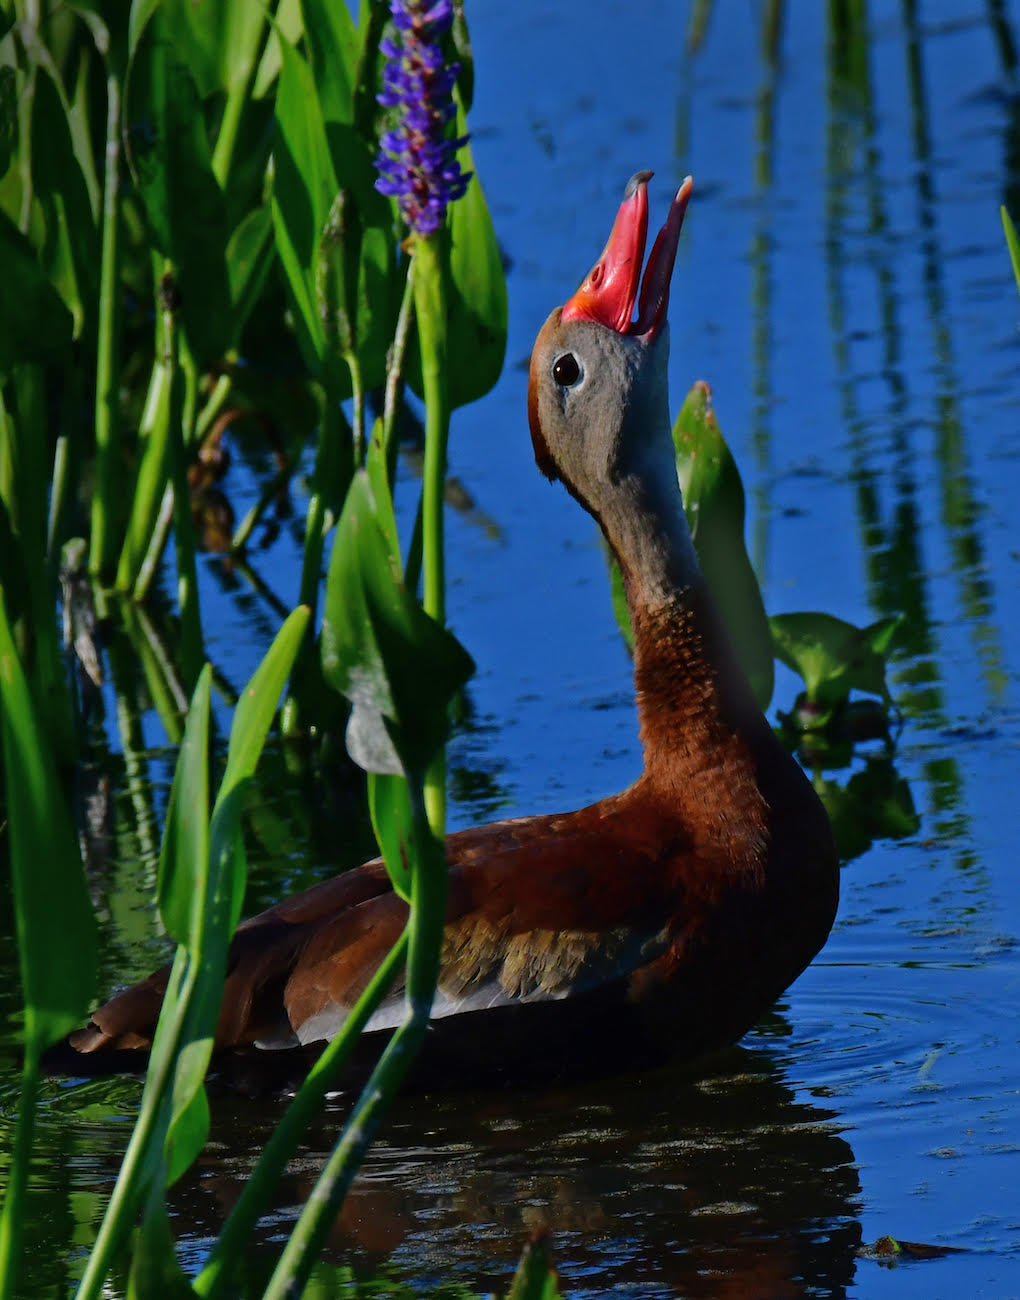 WHISTLING DUCK by Tom Buckard